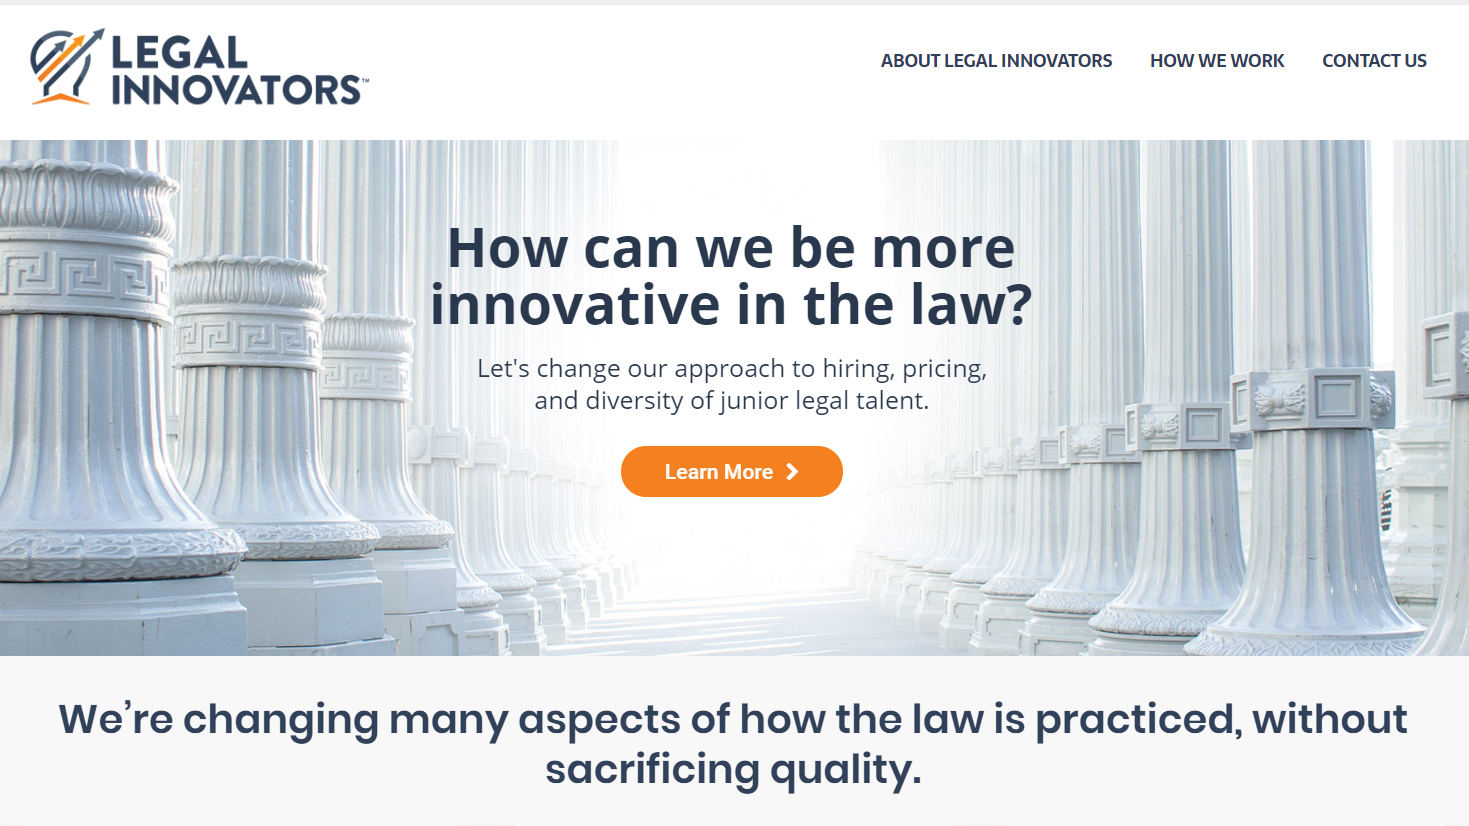 ALSP Startup Seeks to Disrupt the Hiring, Training and Cost of New Lawyers, While Also Increasing Diversity